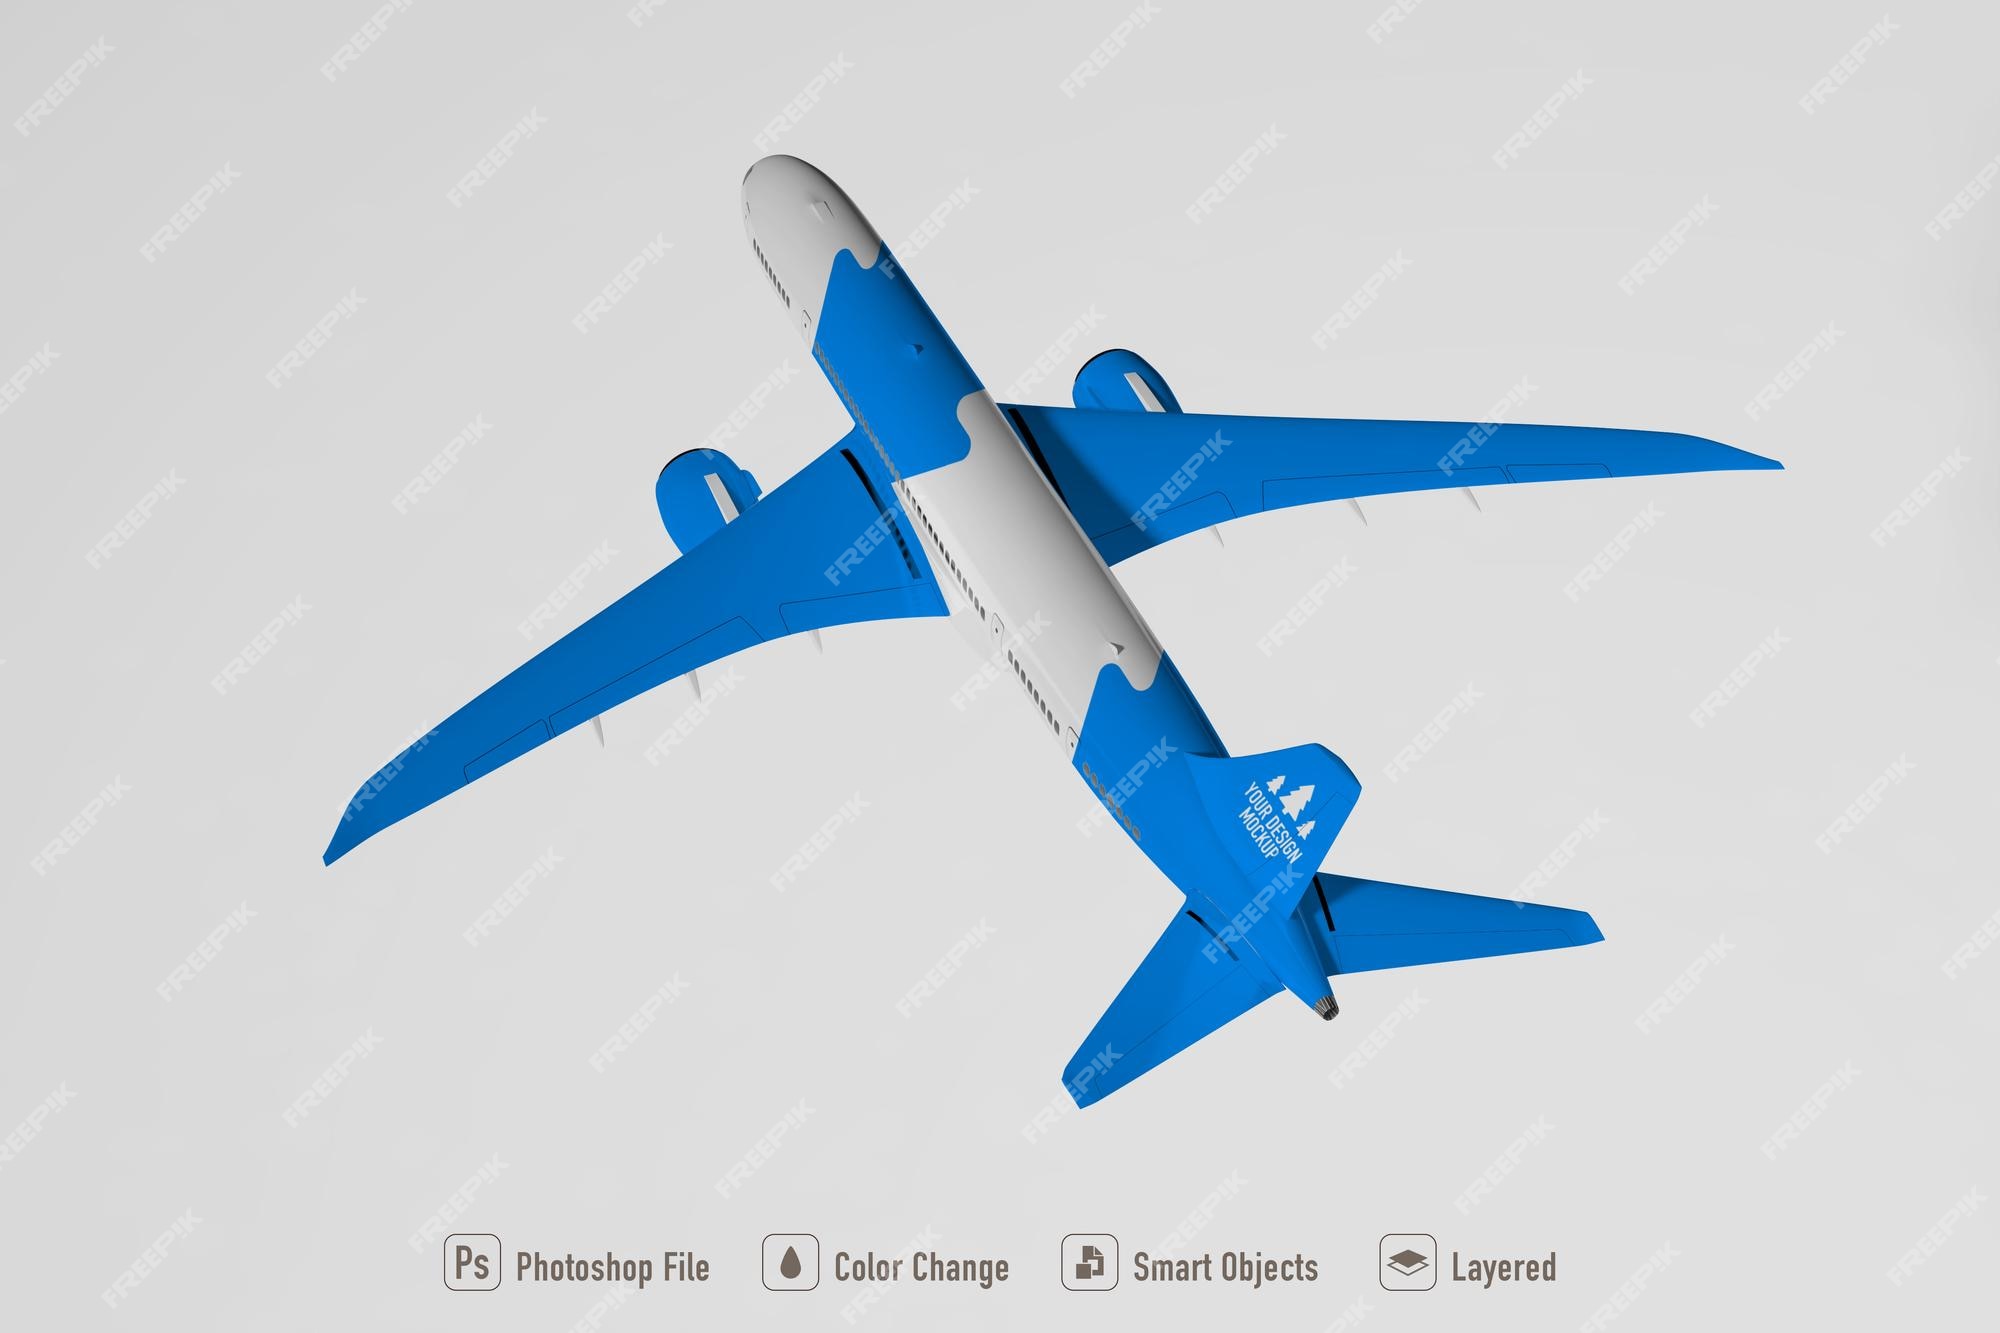 Page 10 | Airplane 3d Images | Free Vectors, Stock Photos & PSD